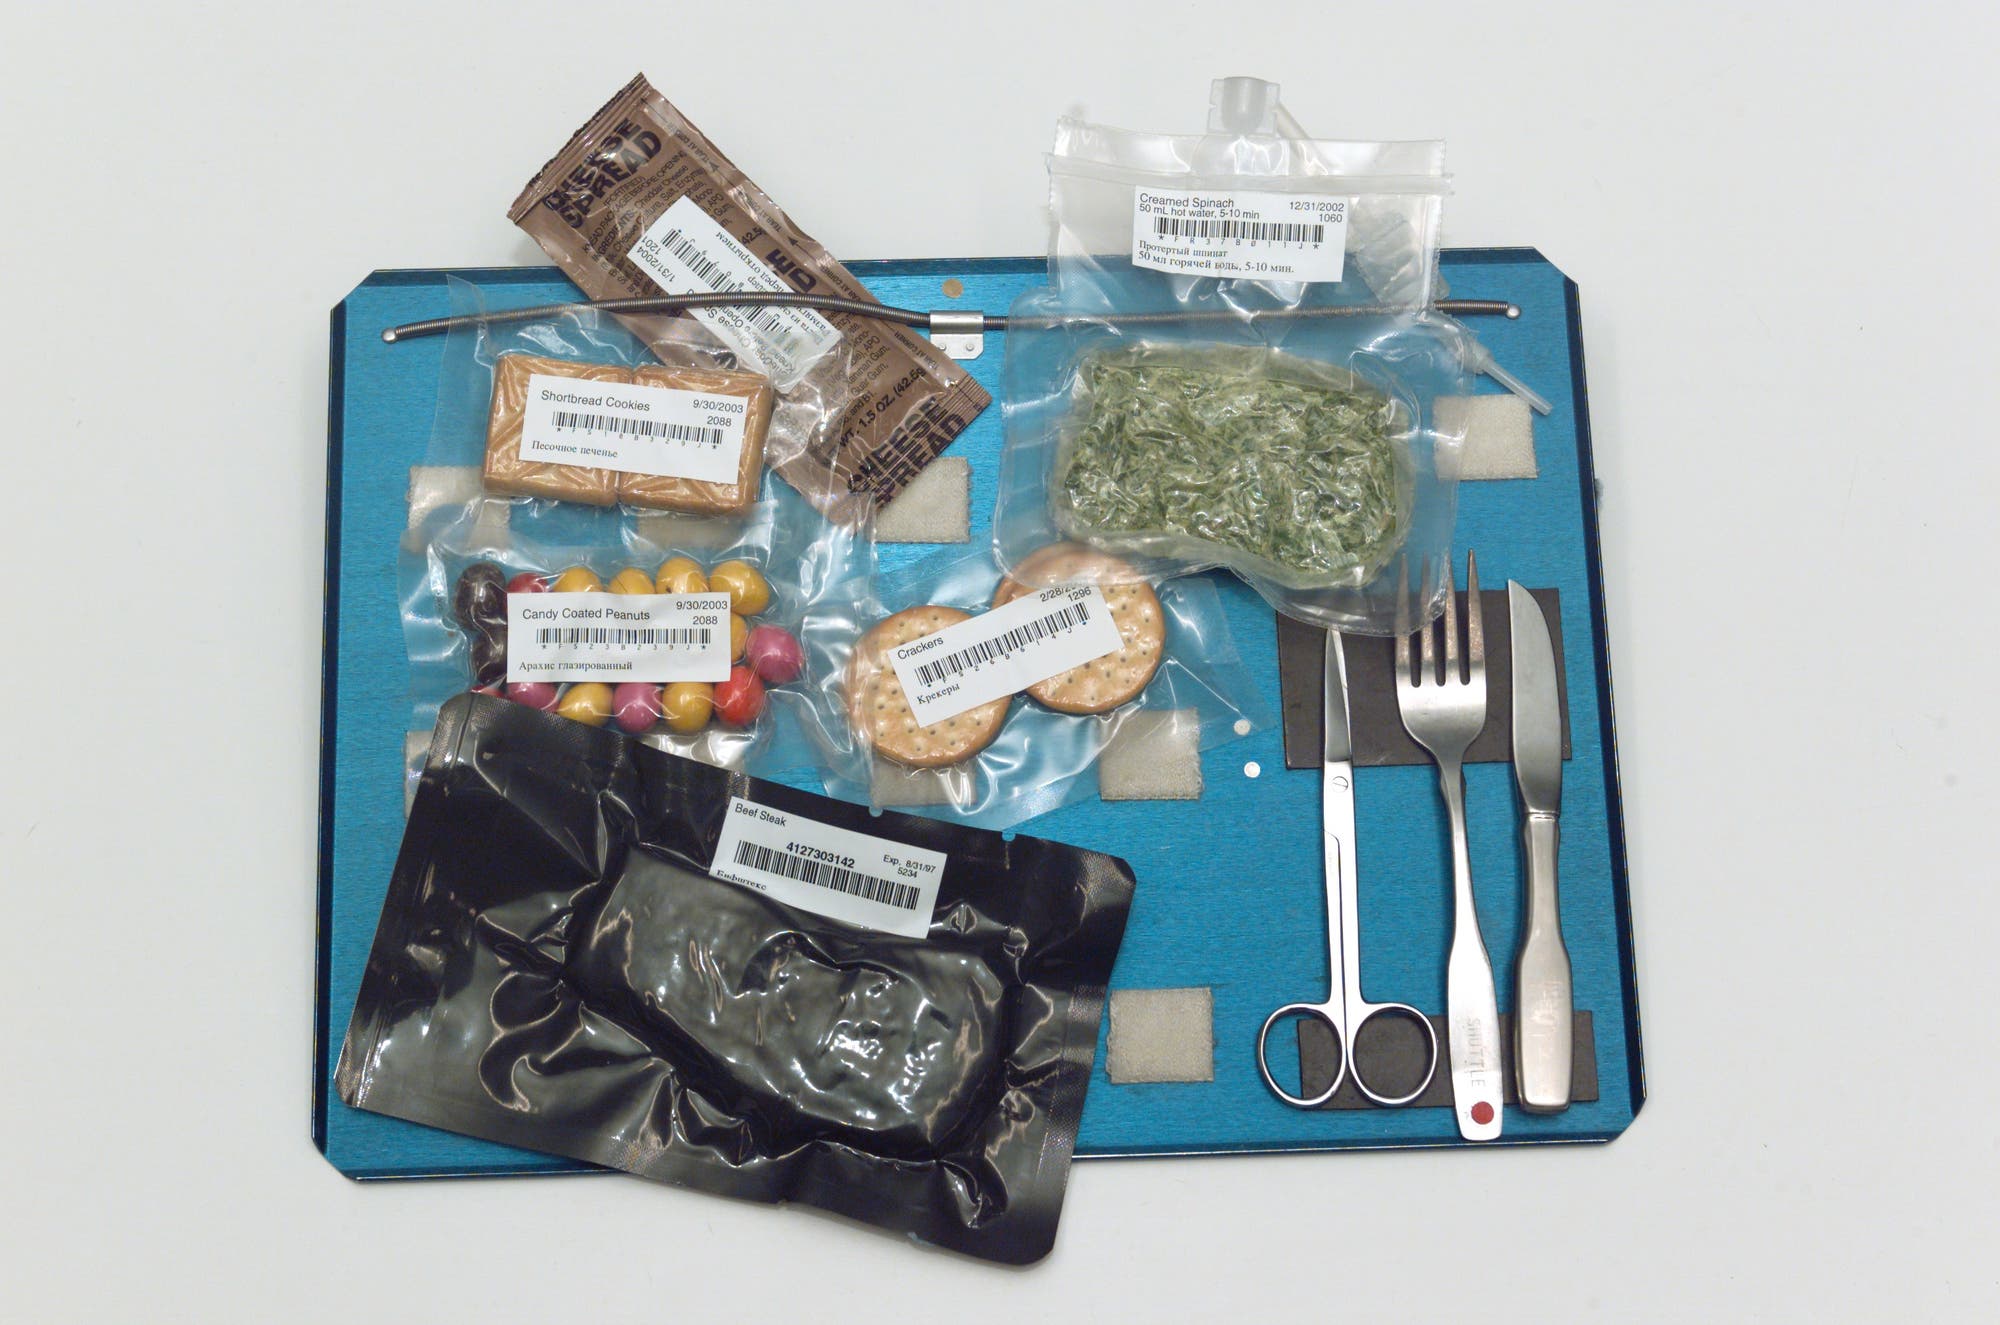 Bags of Space Station food and utensils on tray